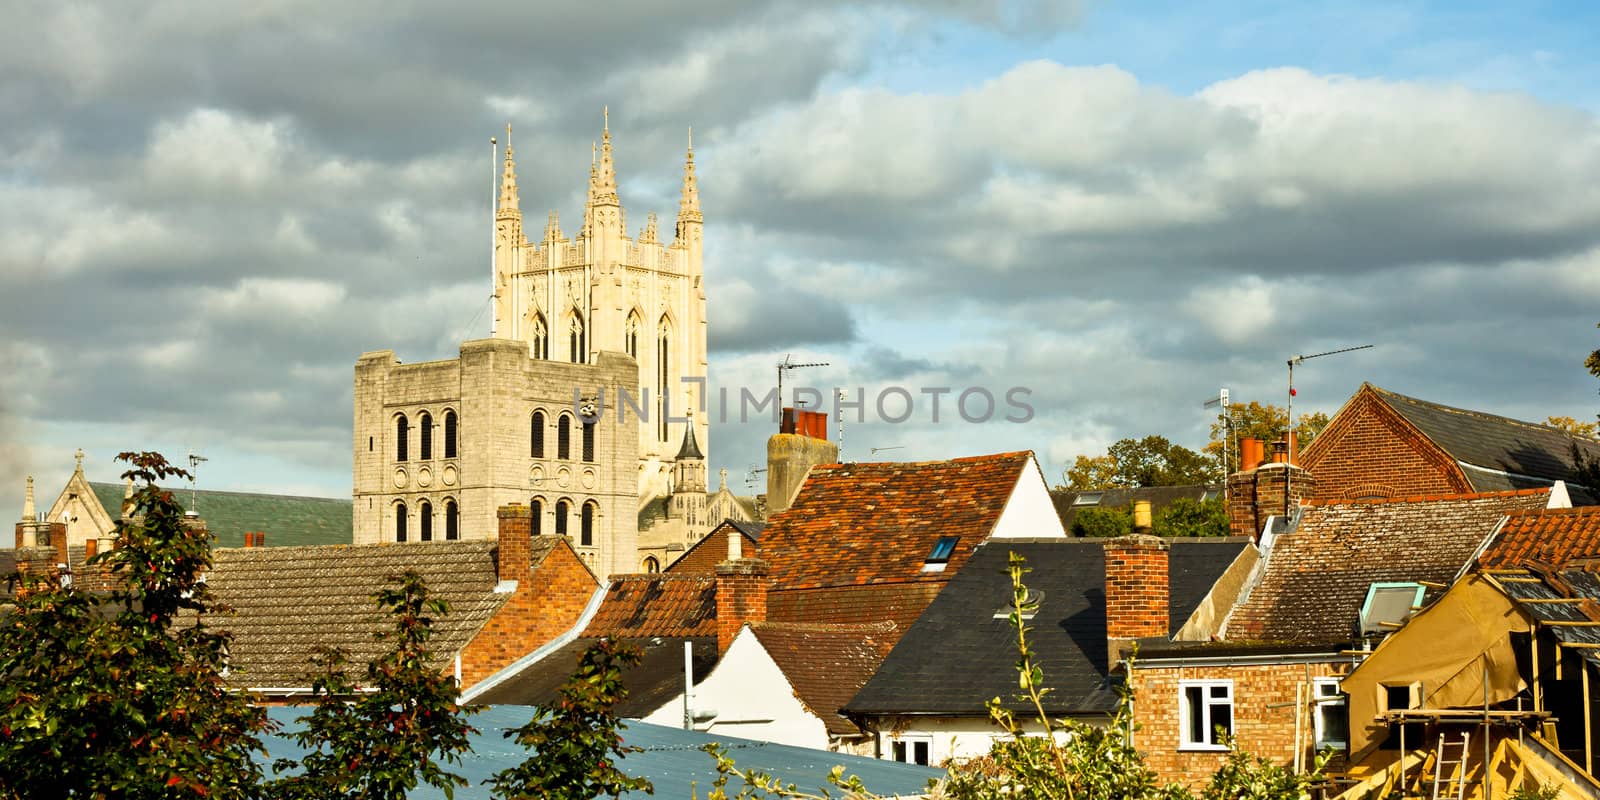 Rooftops and cathedral tower on an autumn day in Bury St Edmunds, UK